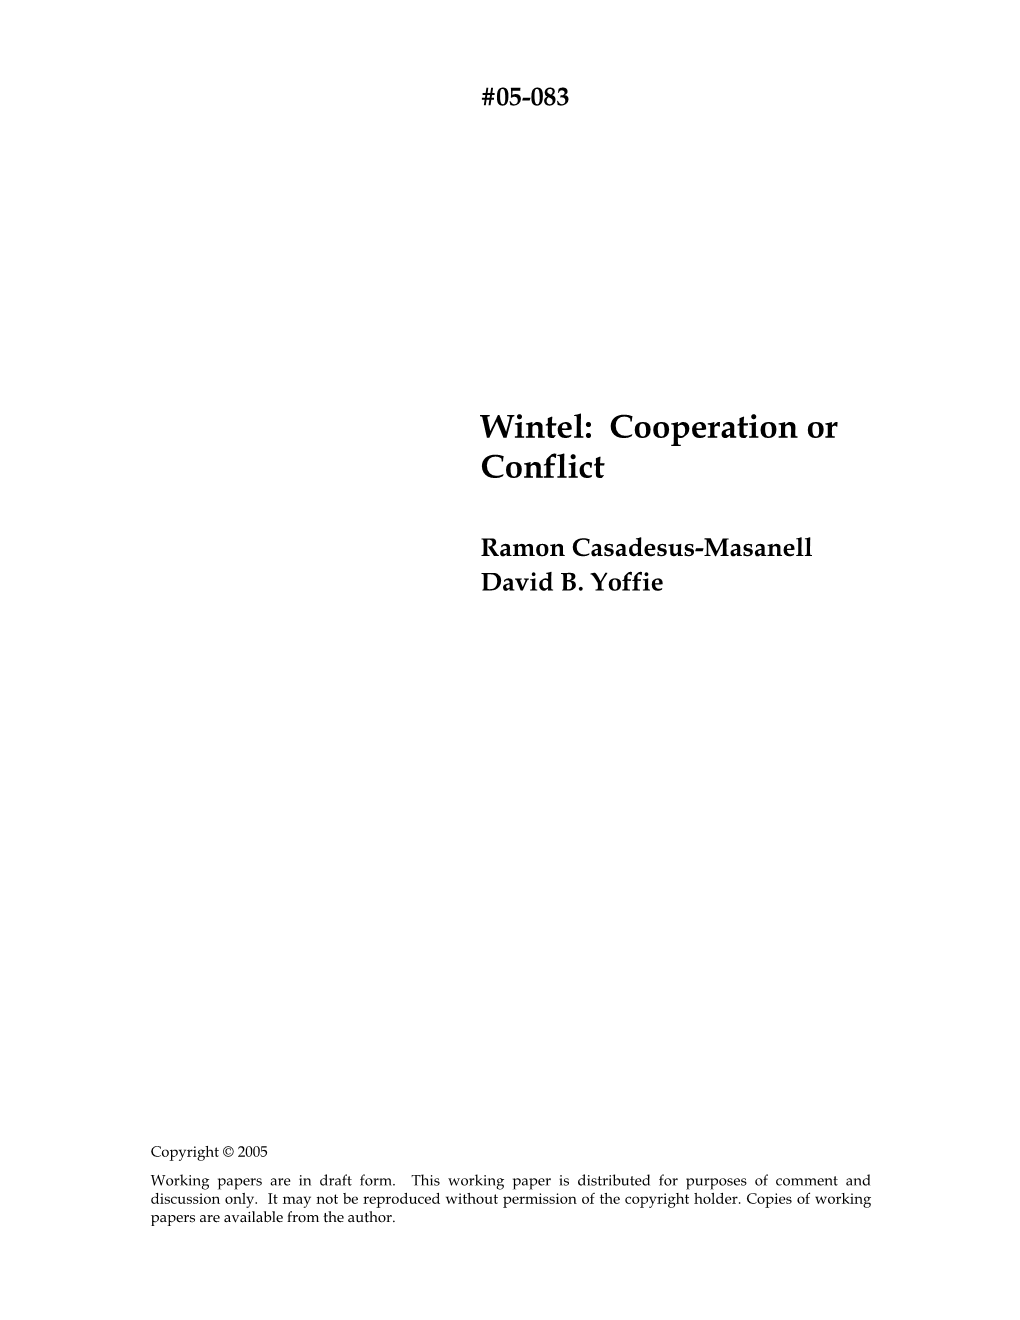 Wintel: Cooperation Or Conflict